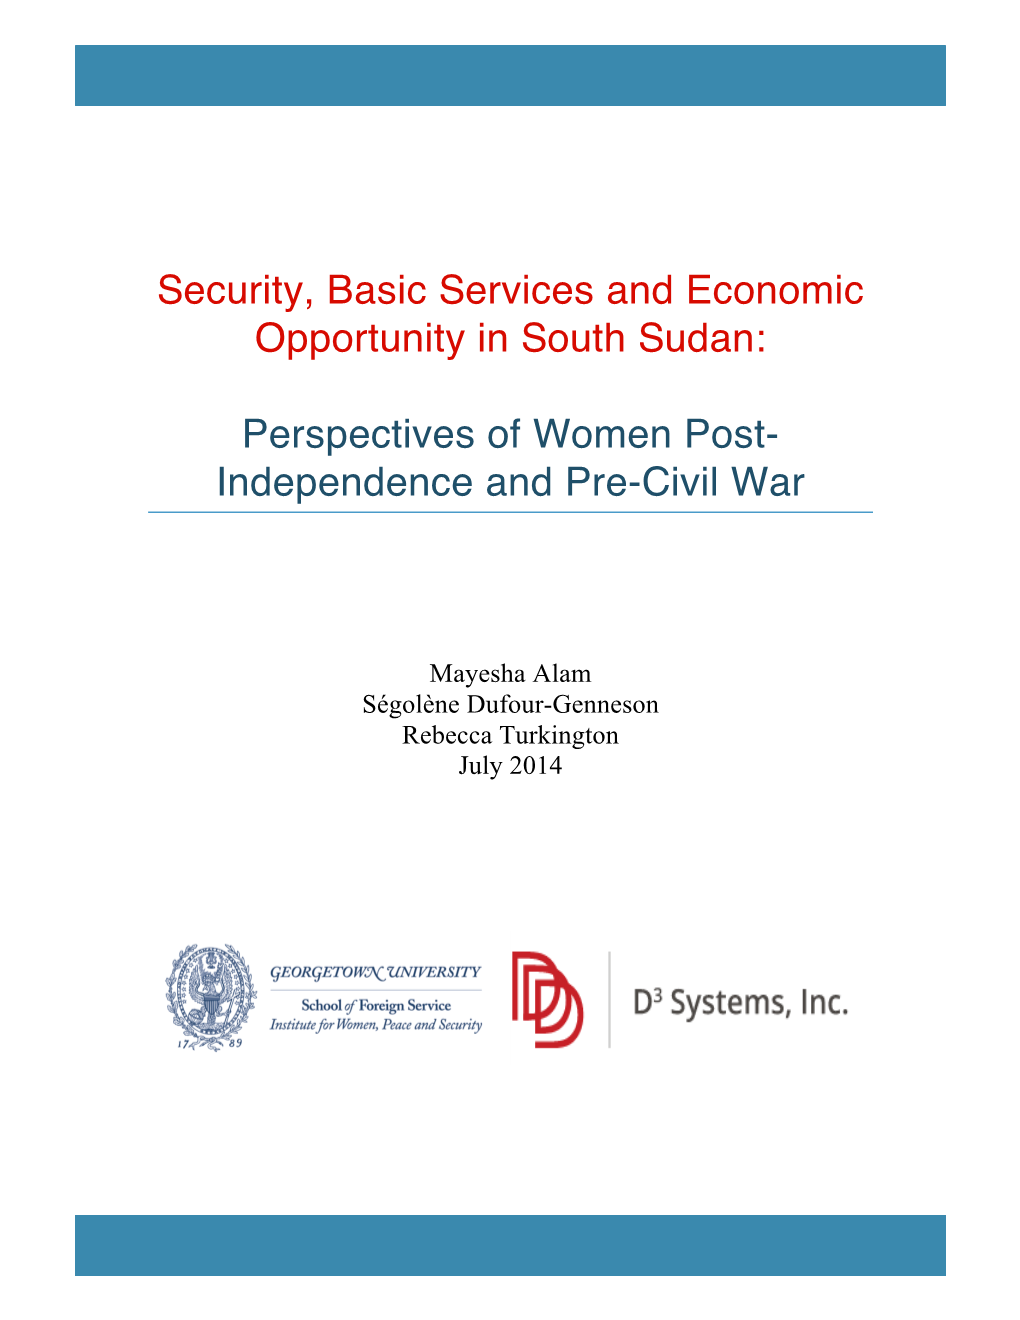 Security, Basic Services and Economic Opportunity in South Sudan